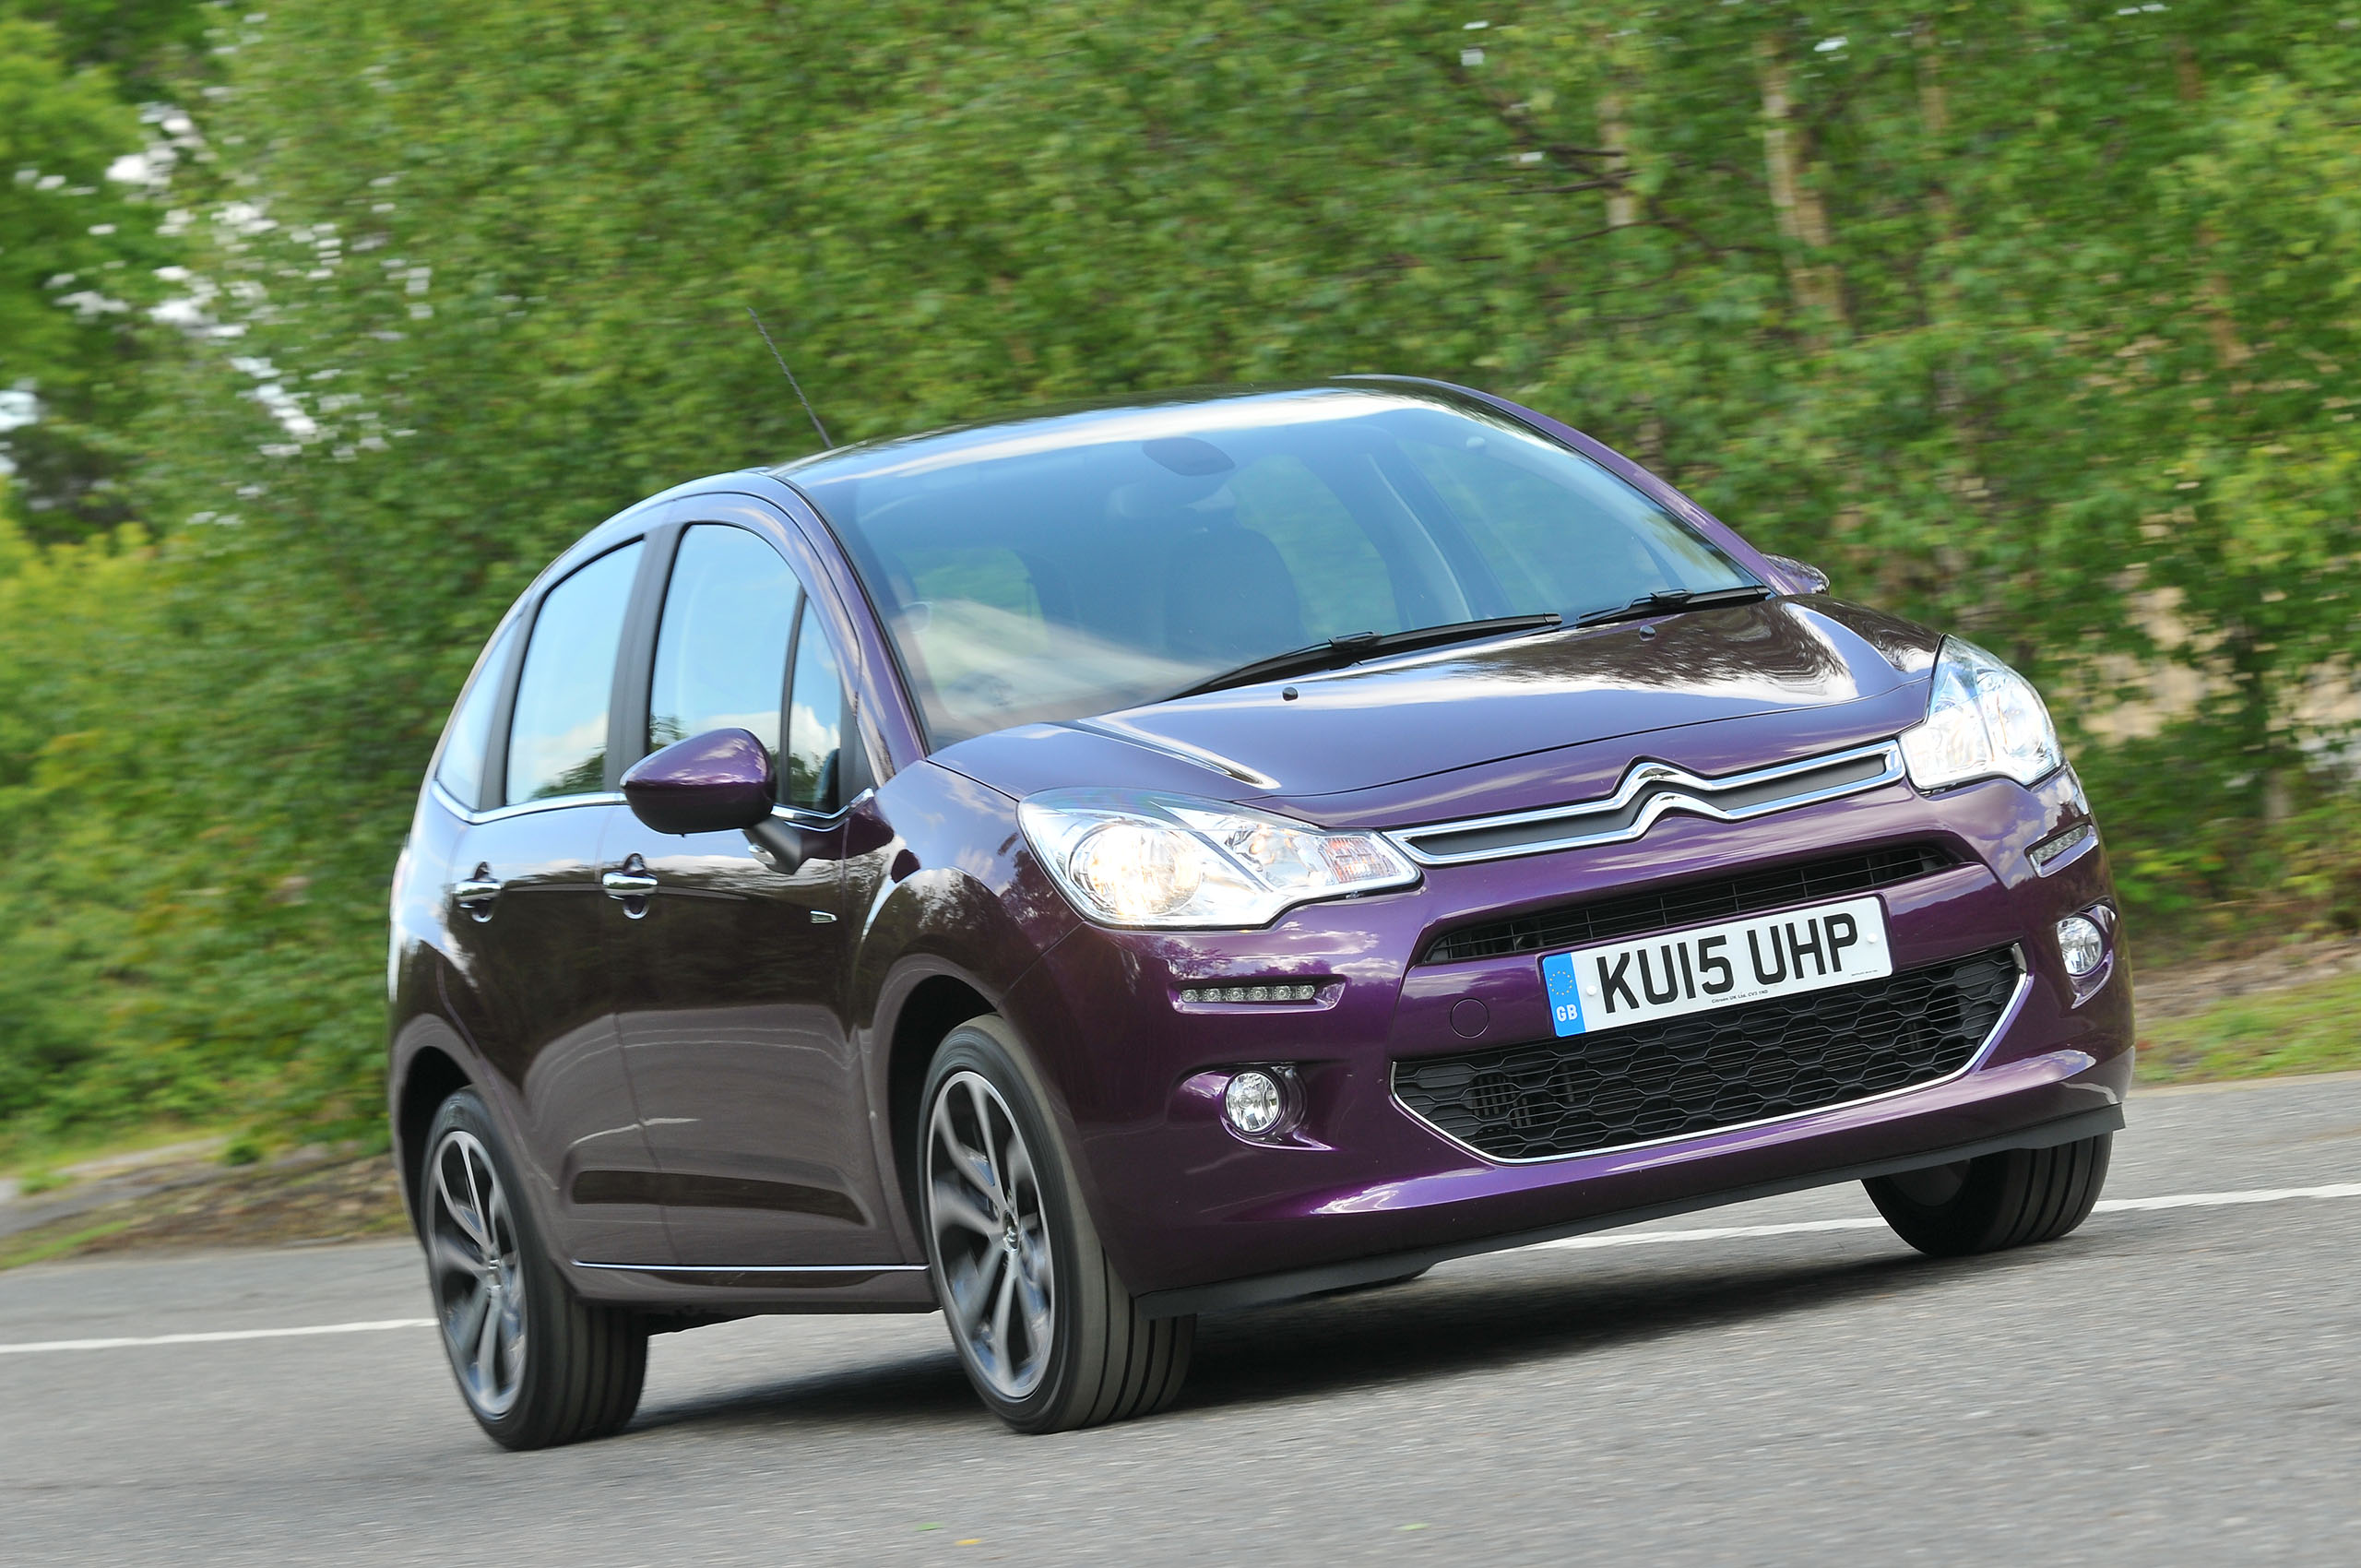 Used Citroen C3 2010-2016 review